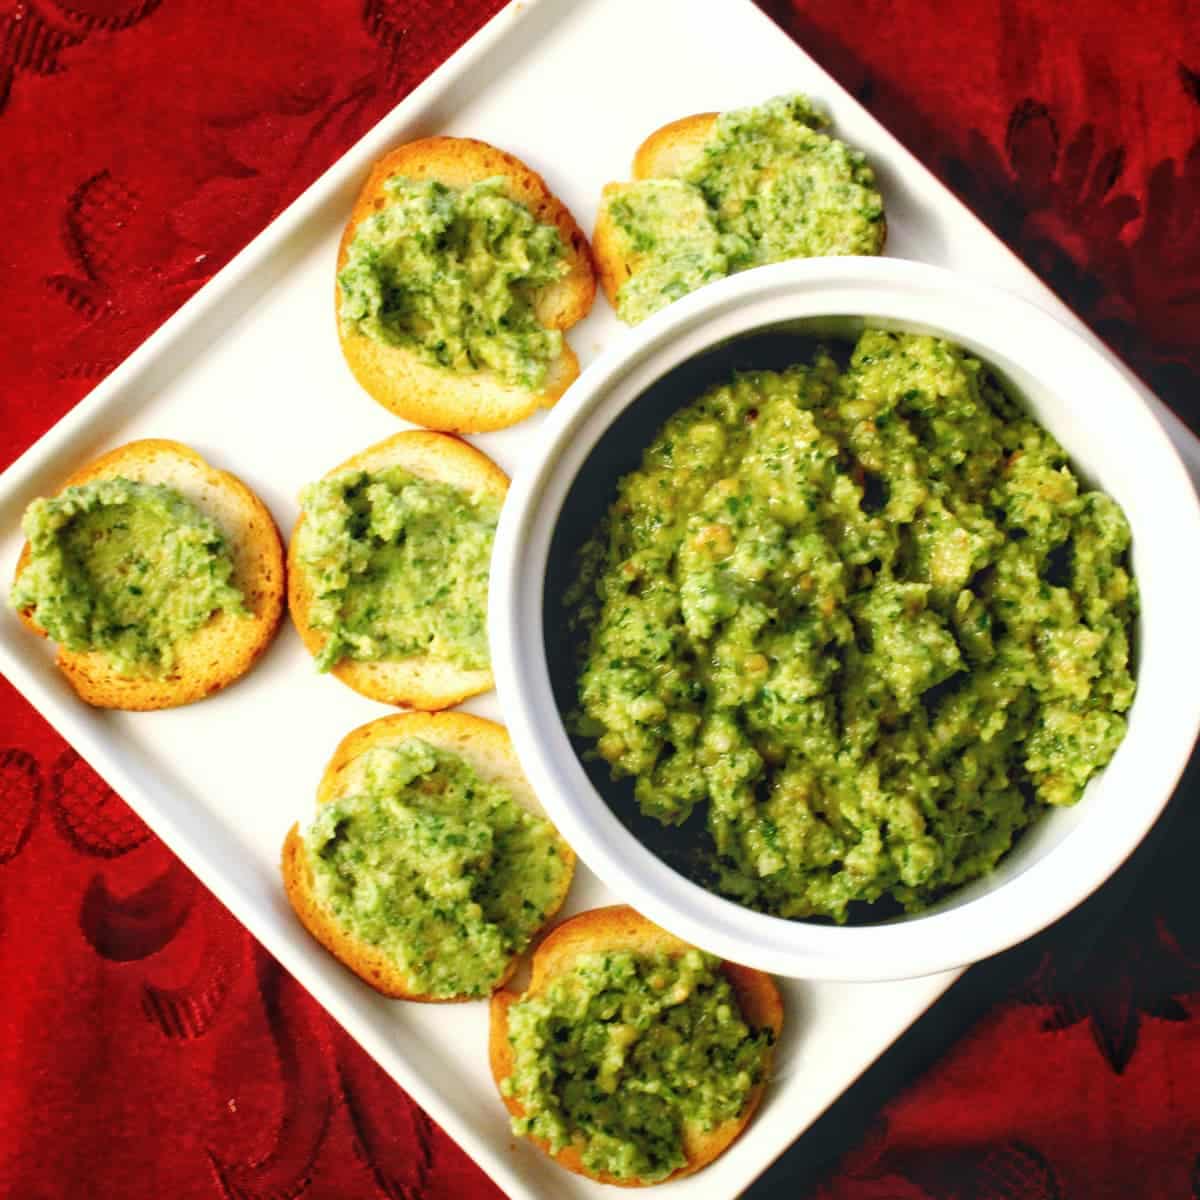 Walnut parsley pesto recipe made with cheddar cheese, olive oil, and garlic. The pesto is served on bagel rounds. Recipe from cleveland cooking